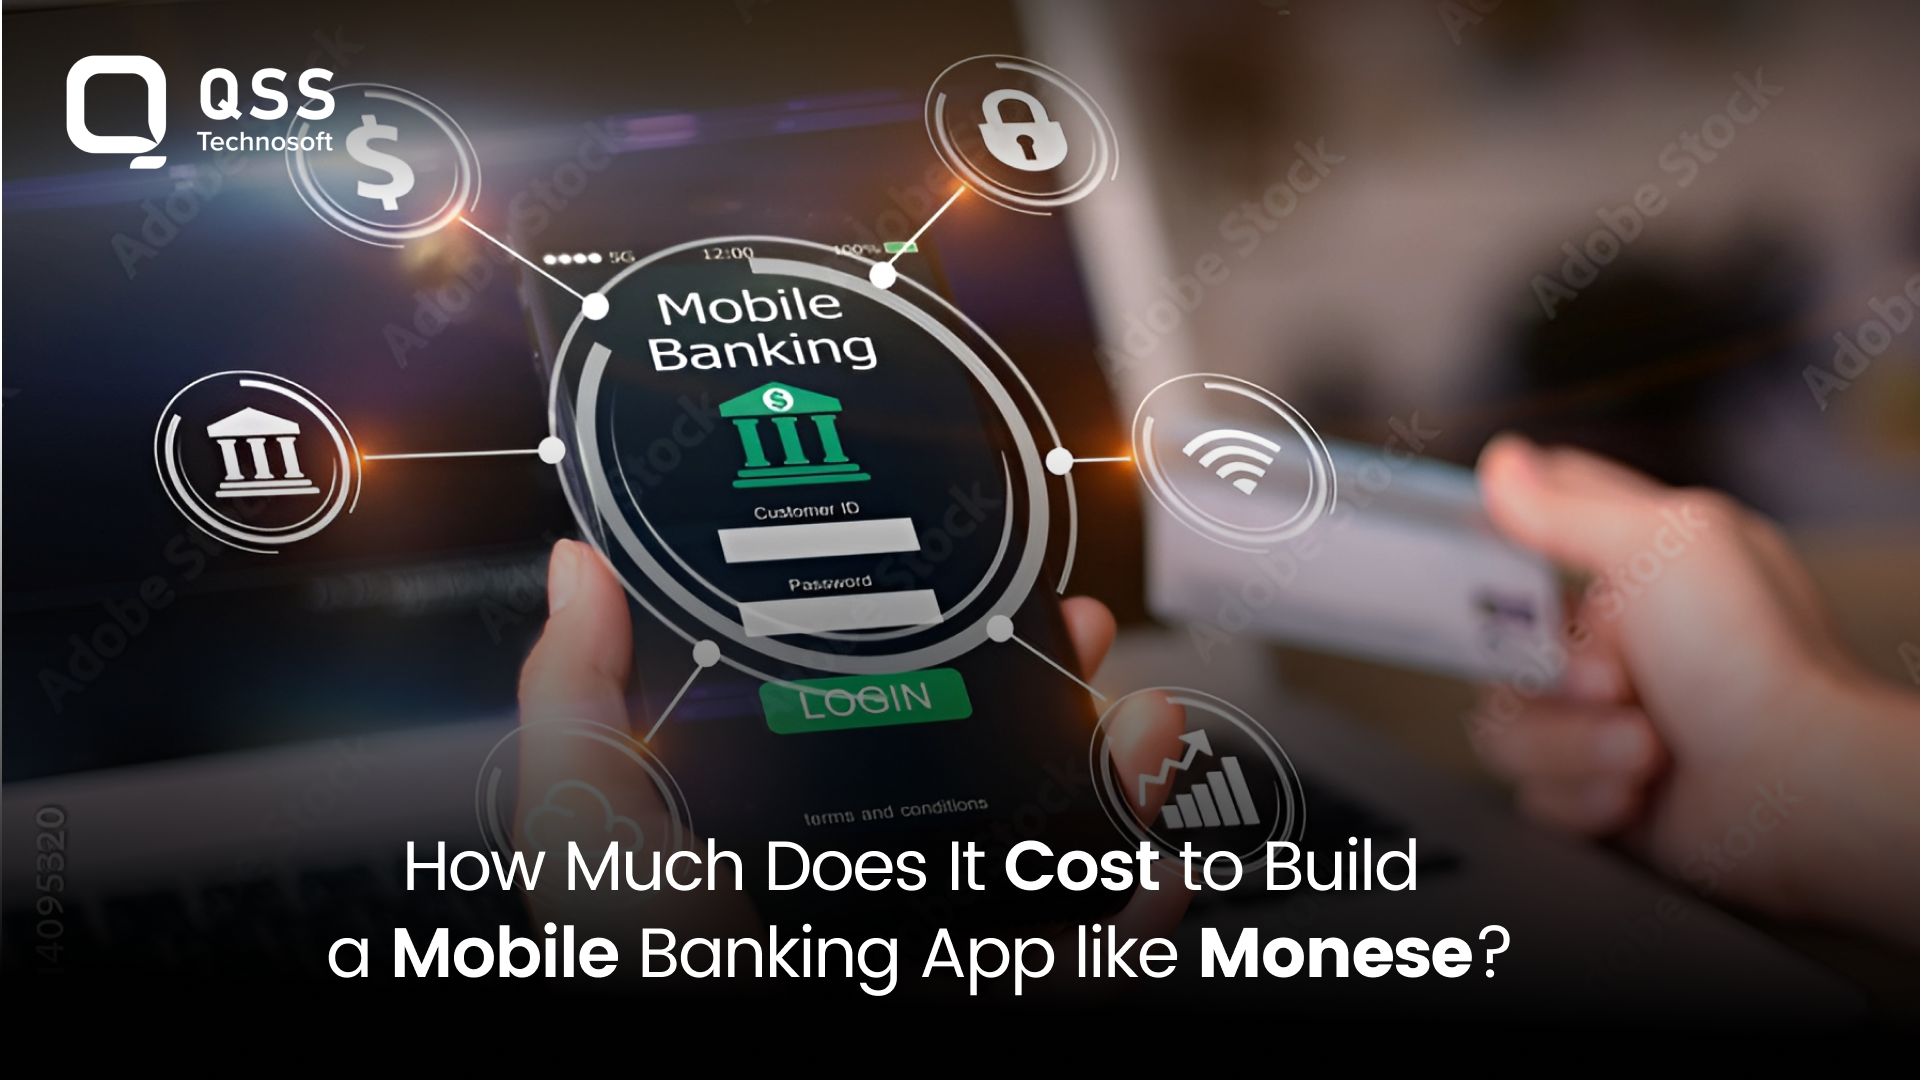 How much does it cost to build a mobile banking app like Monese?